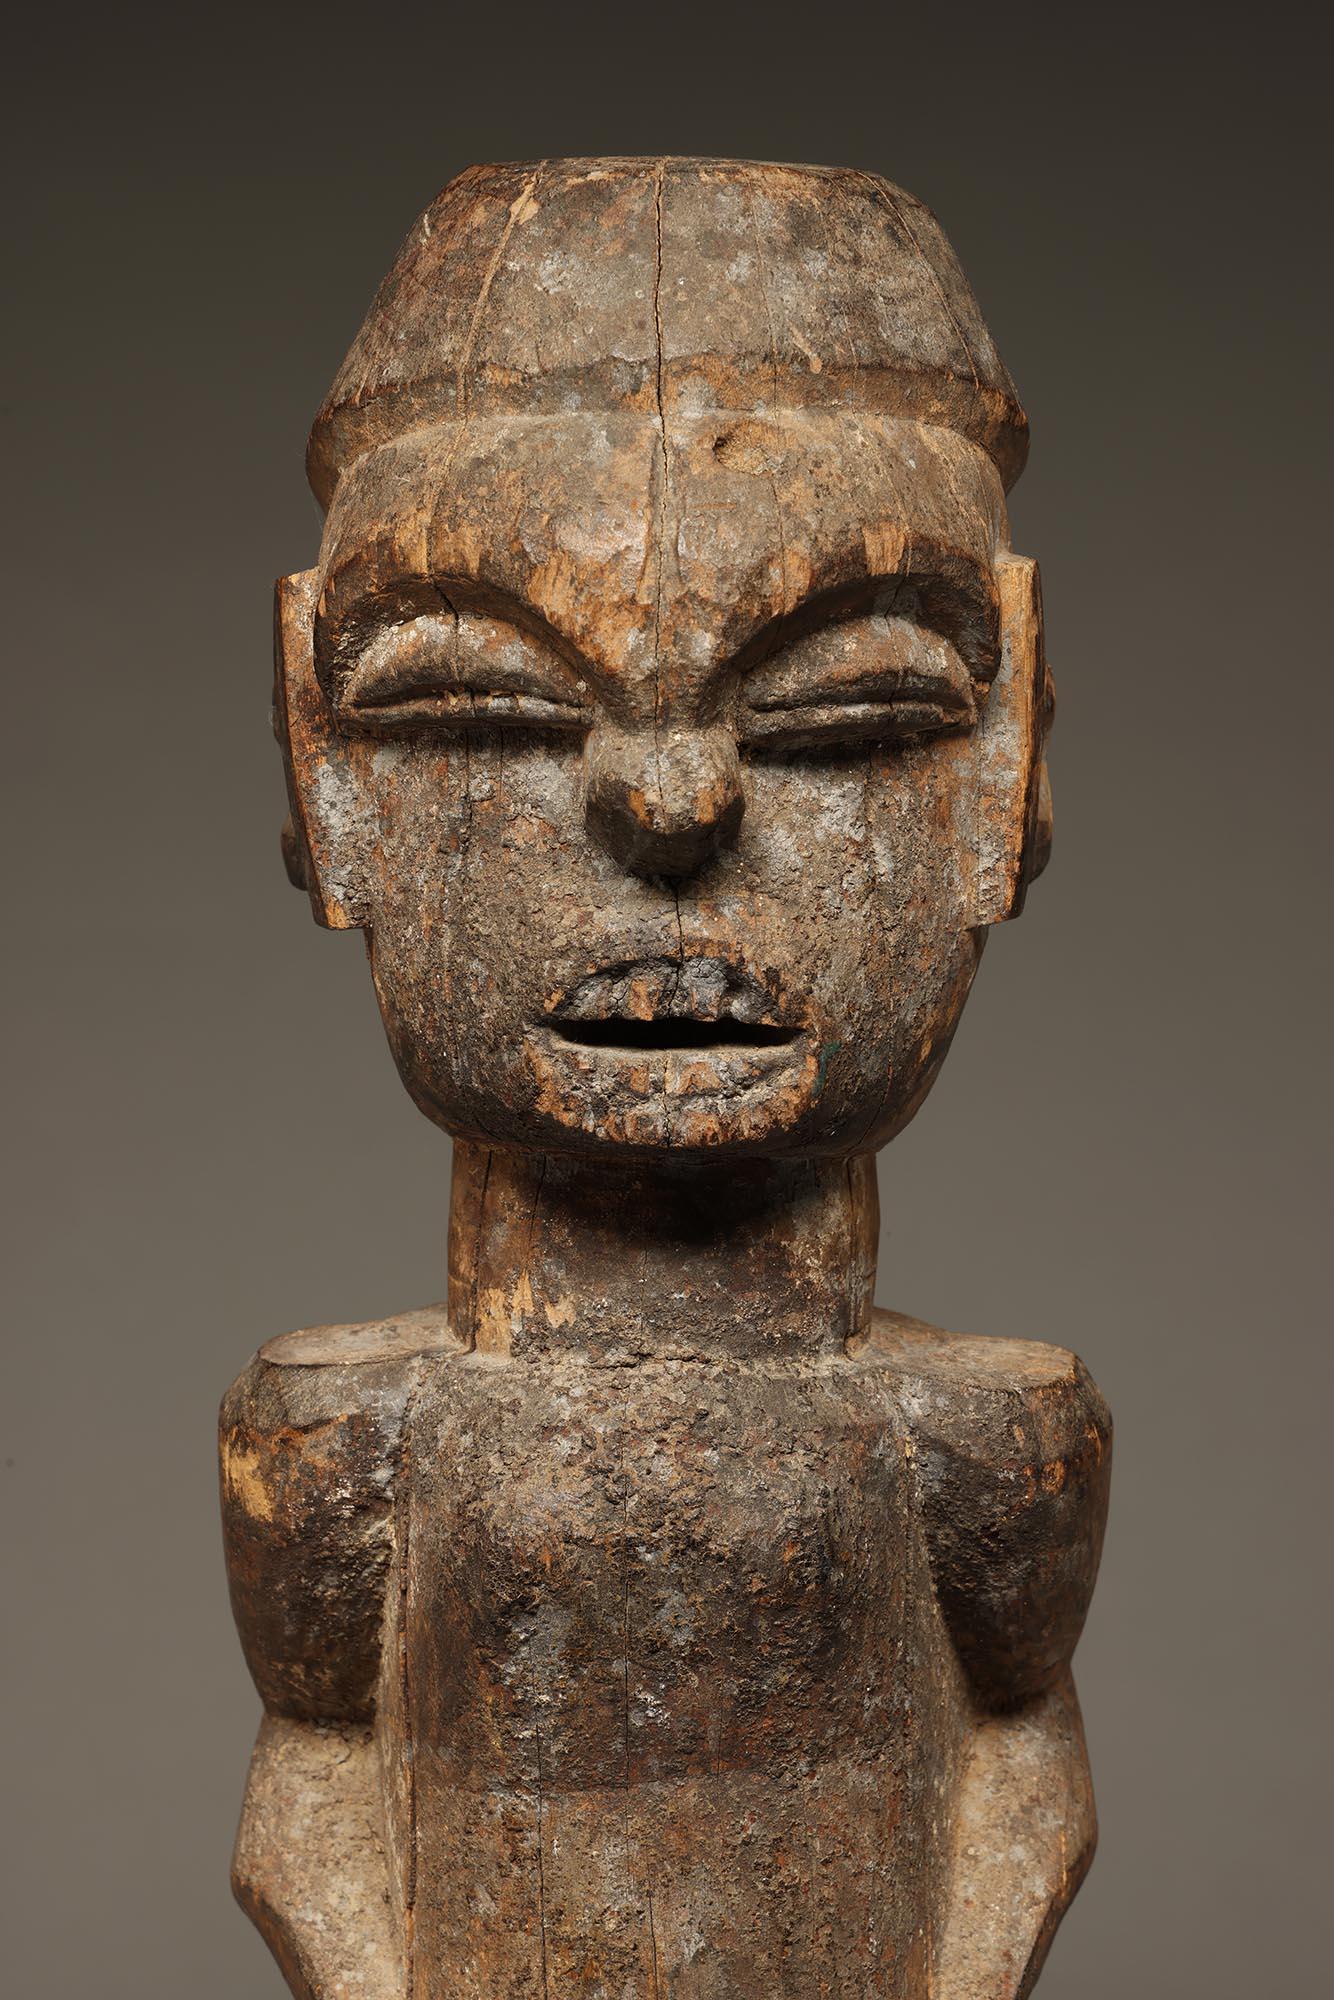 Early Ibibio standing carved wood male figure, powerful expression with hands on sides of stomach, exposed teeth and vertical raised scarification marks on sides of face.  From a shrine with the remains of encrusted offerings, weathering and